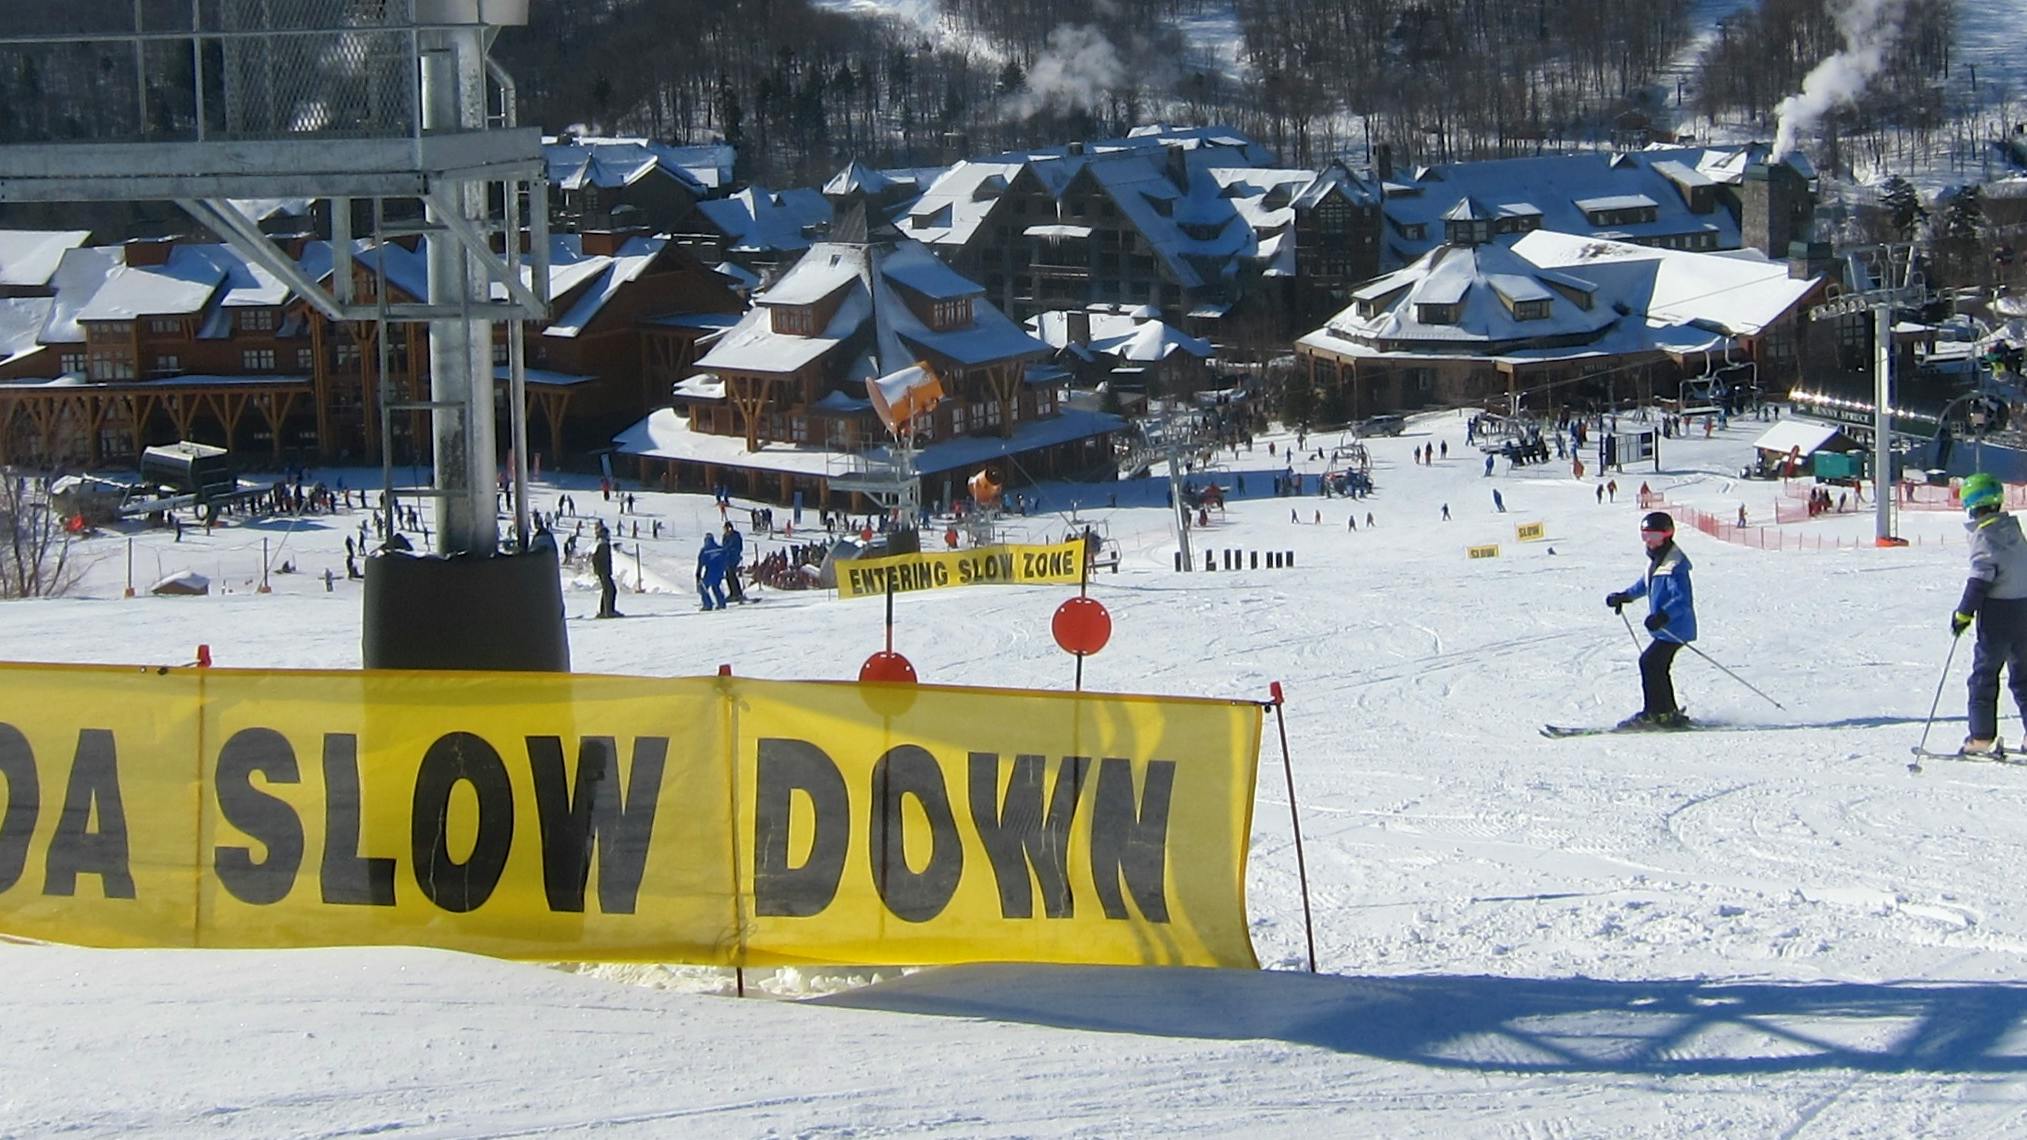 A large yellow sign at a ski resort reads "Woah Slow Down."